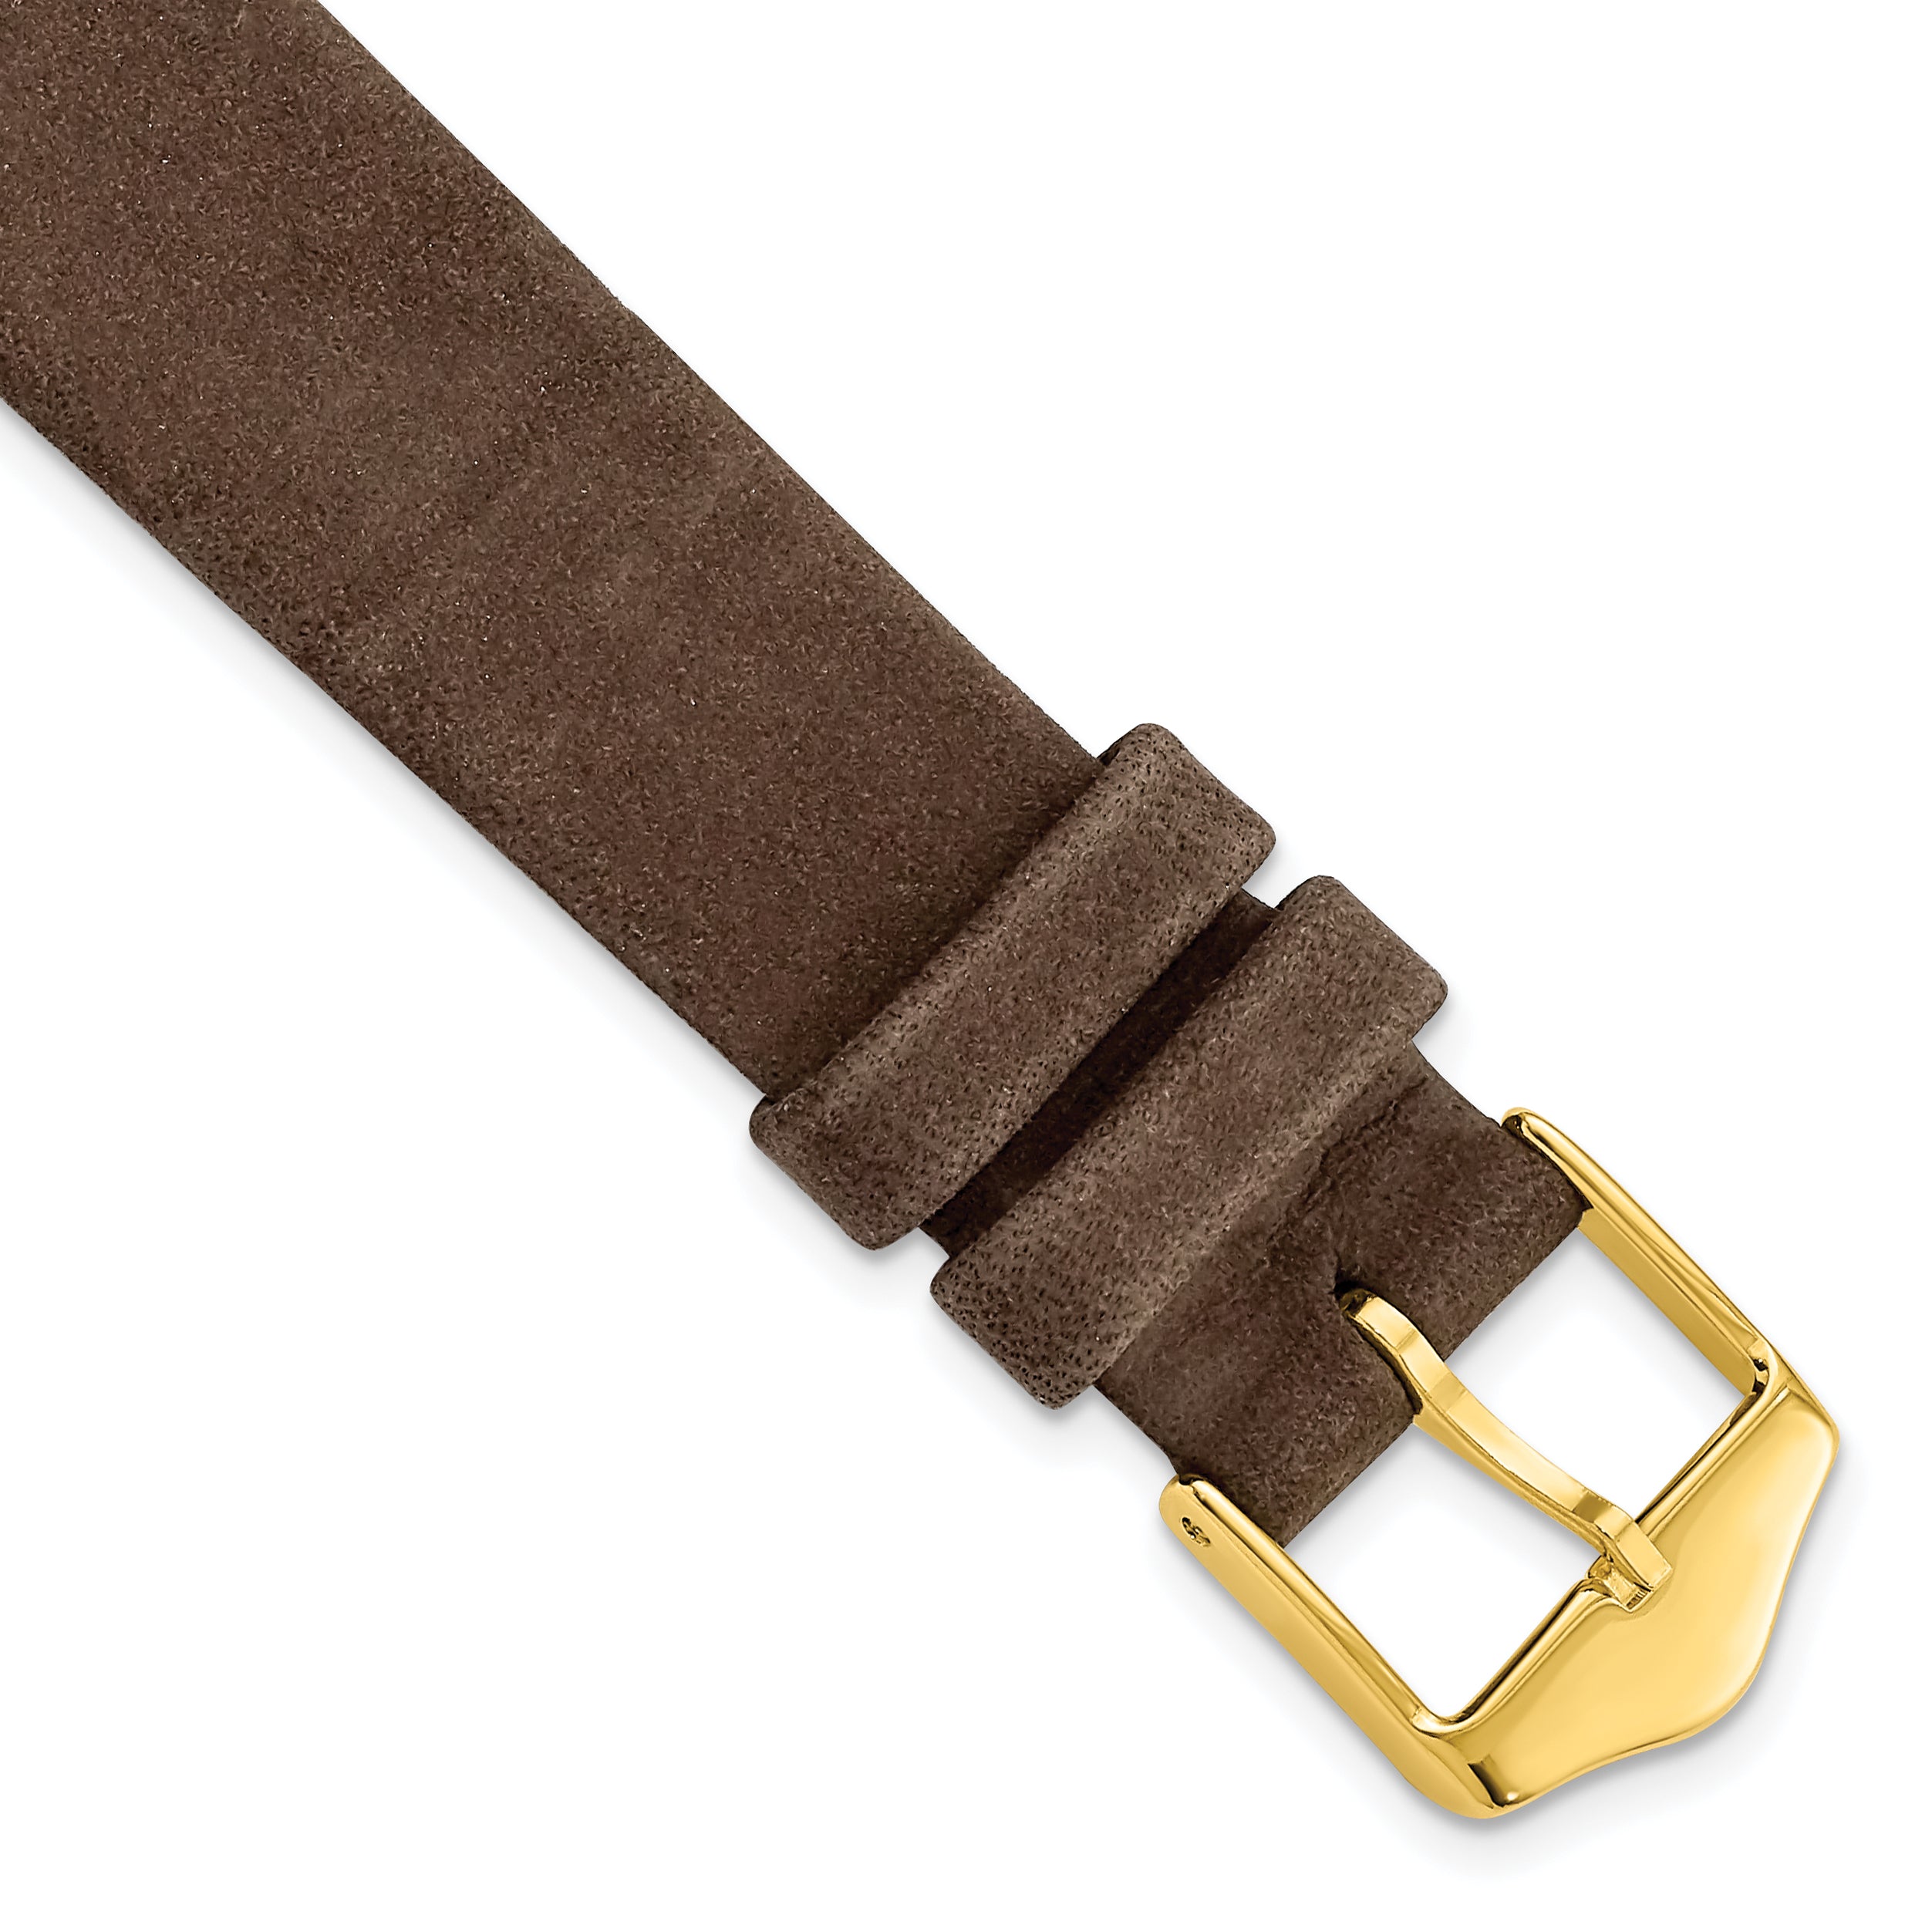 DeBeer 16mm Dark Brown Suede Flat Leather with Gold-tone Buckle 6.75 inch Watch Band